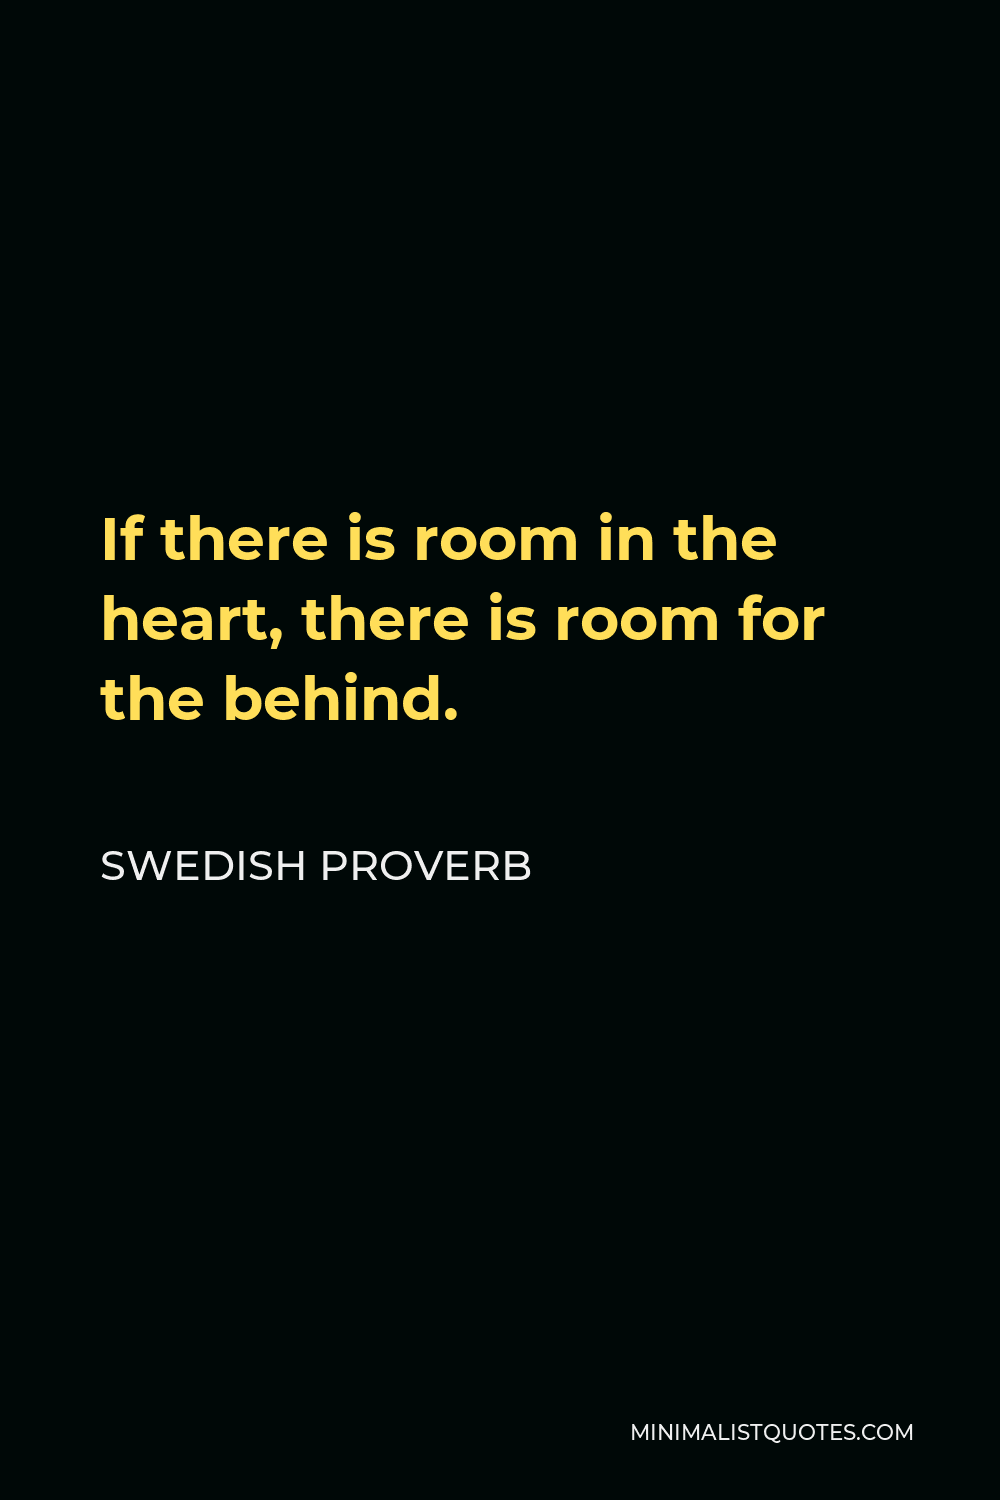 Swedish Proverb Quote - If there is room in the heart, there is room for the behind.